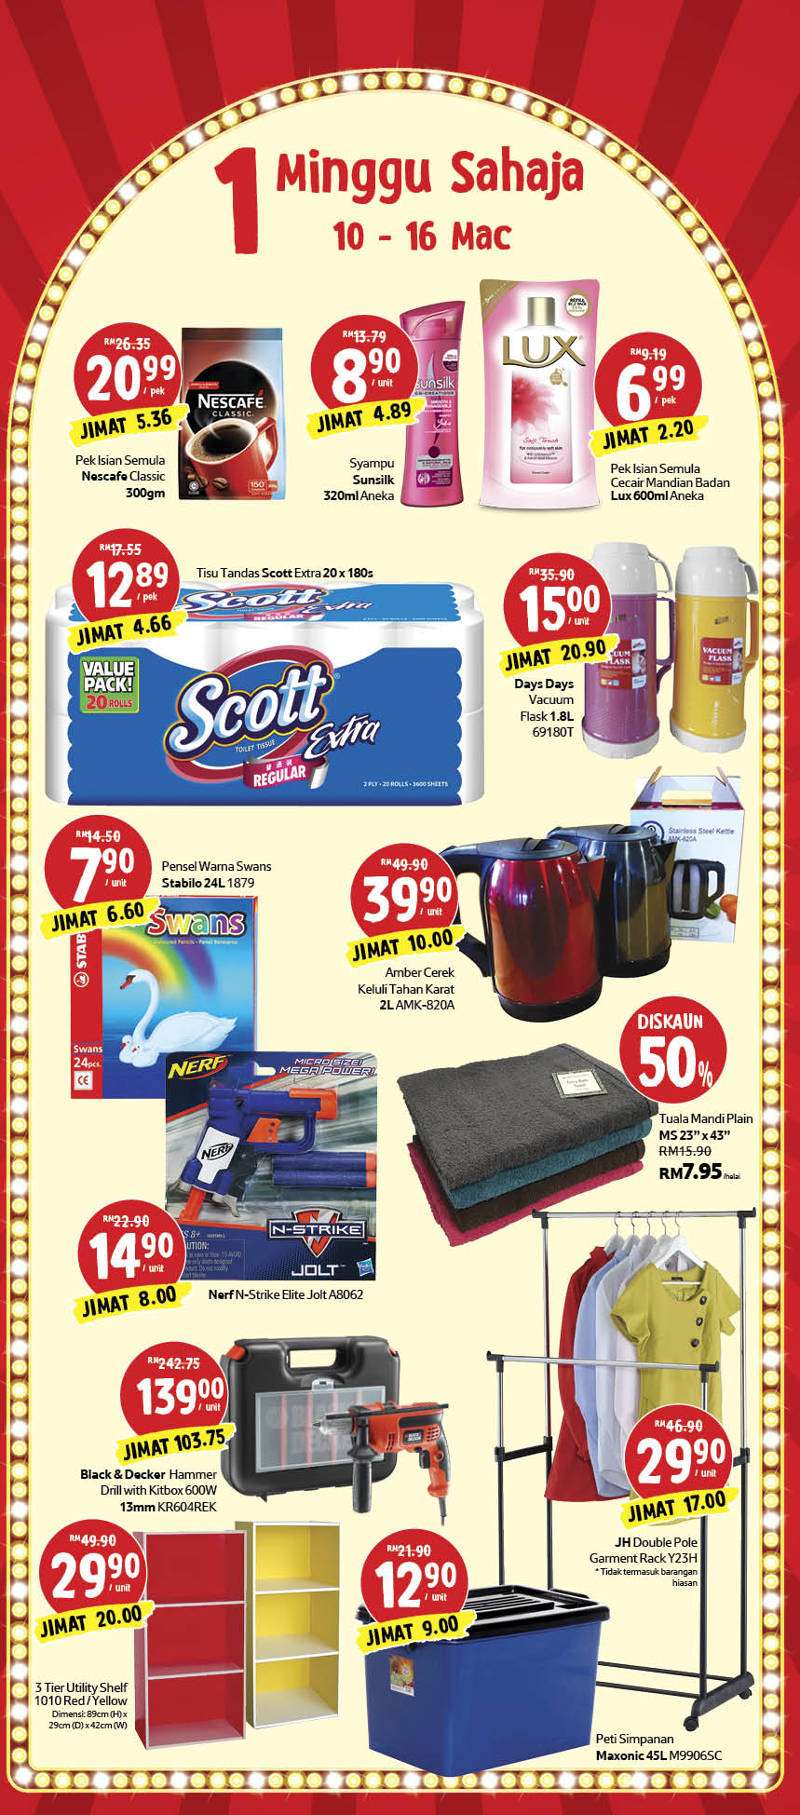 Tesco Malaysia Weekly Catalogue (10 March - 16 March 2016)